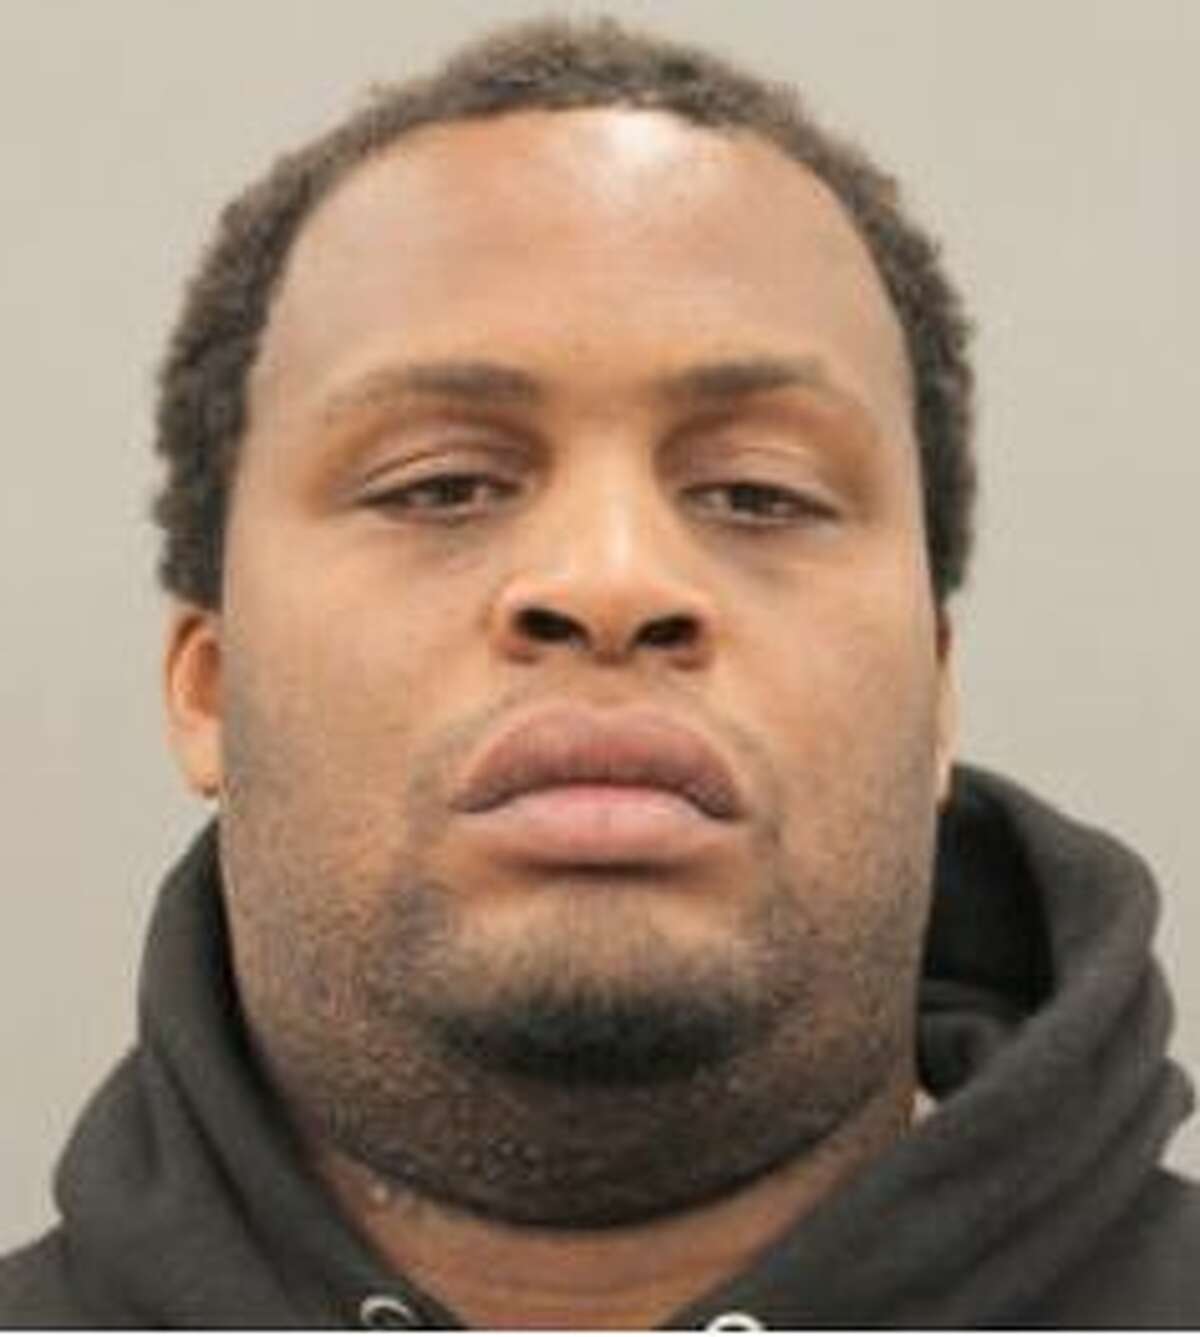 Eric Ross, 26, was charged with manslaughter in a car crash that killed a 70-year-old man this week in northeast Houston, according to police.